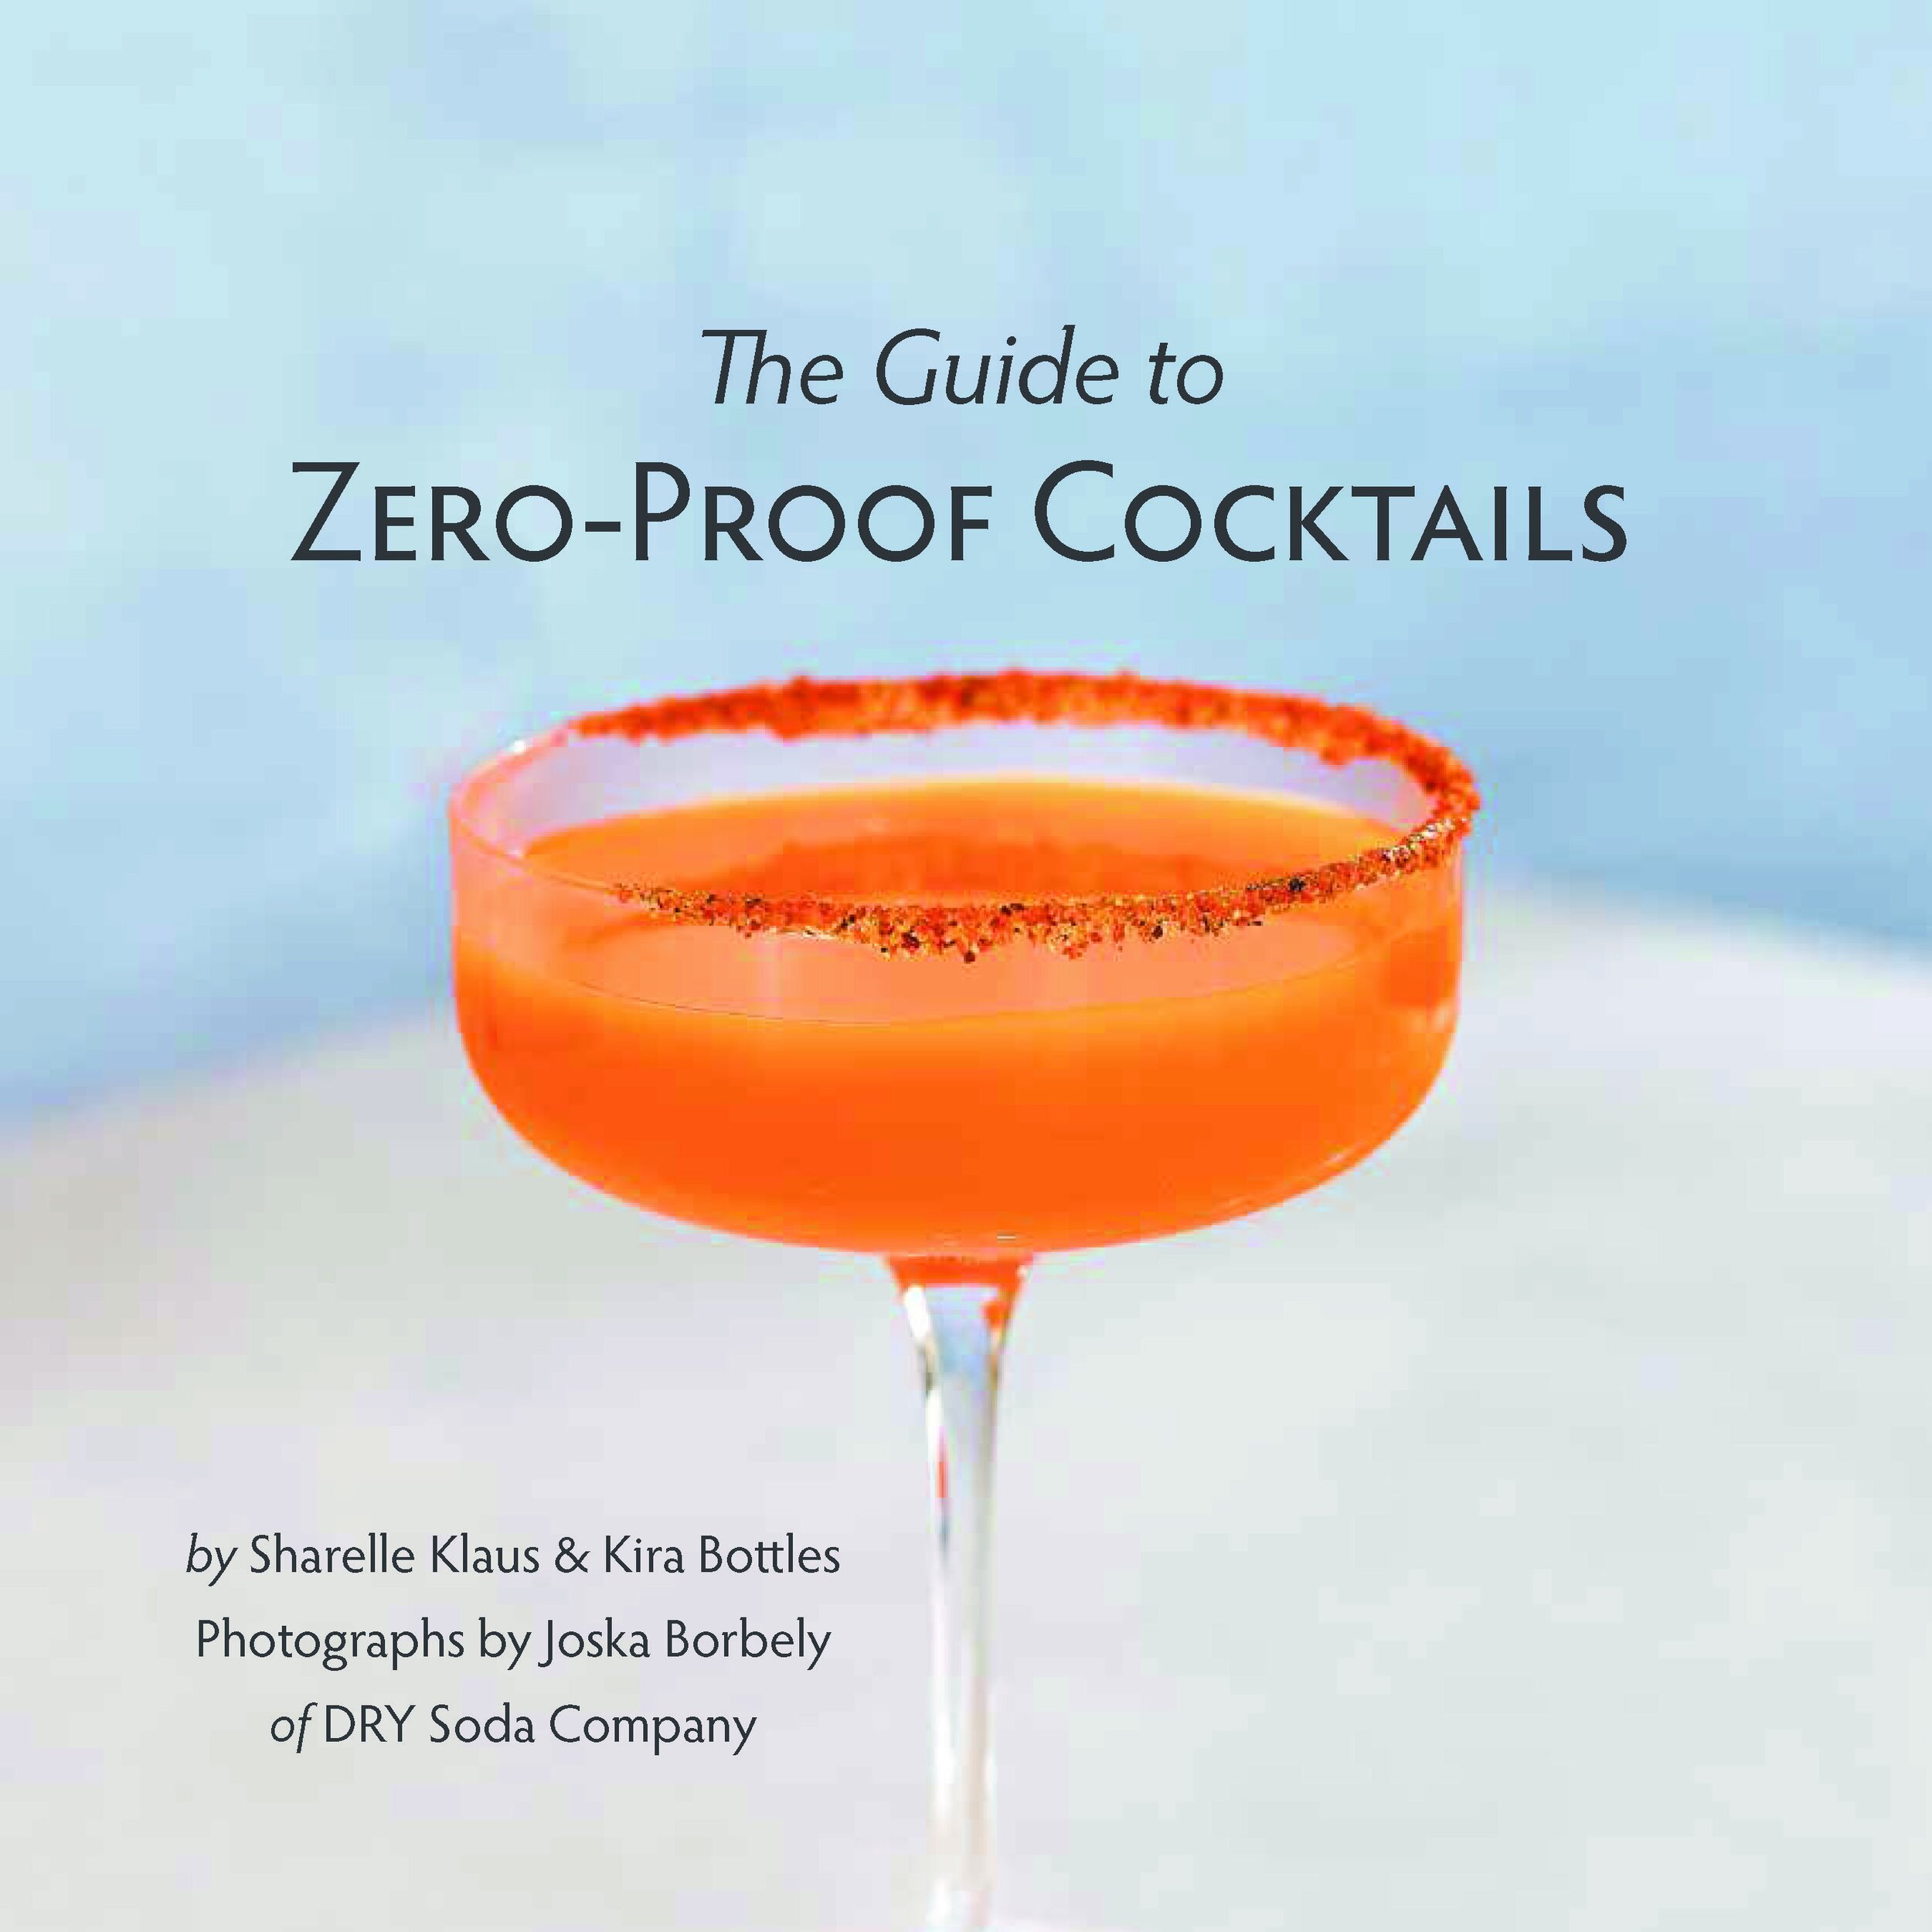 The Guide to Zero Proof Cocktails